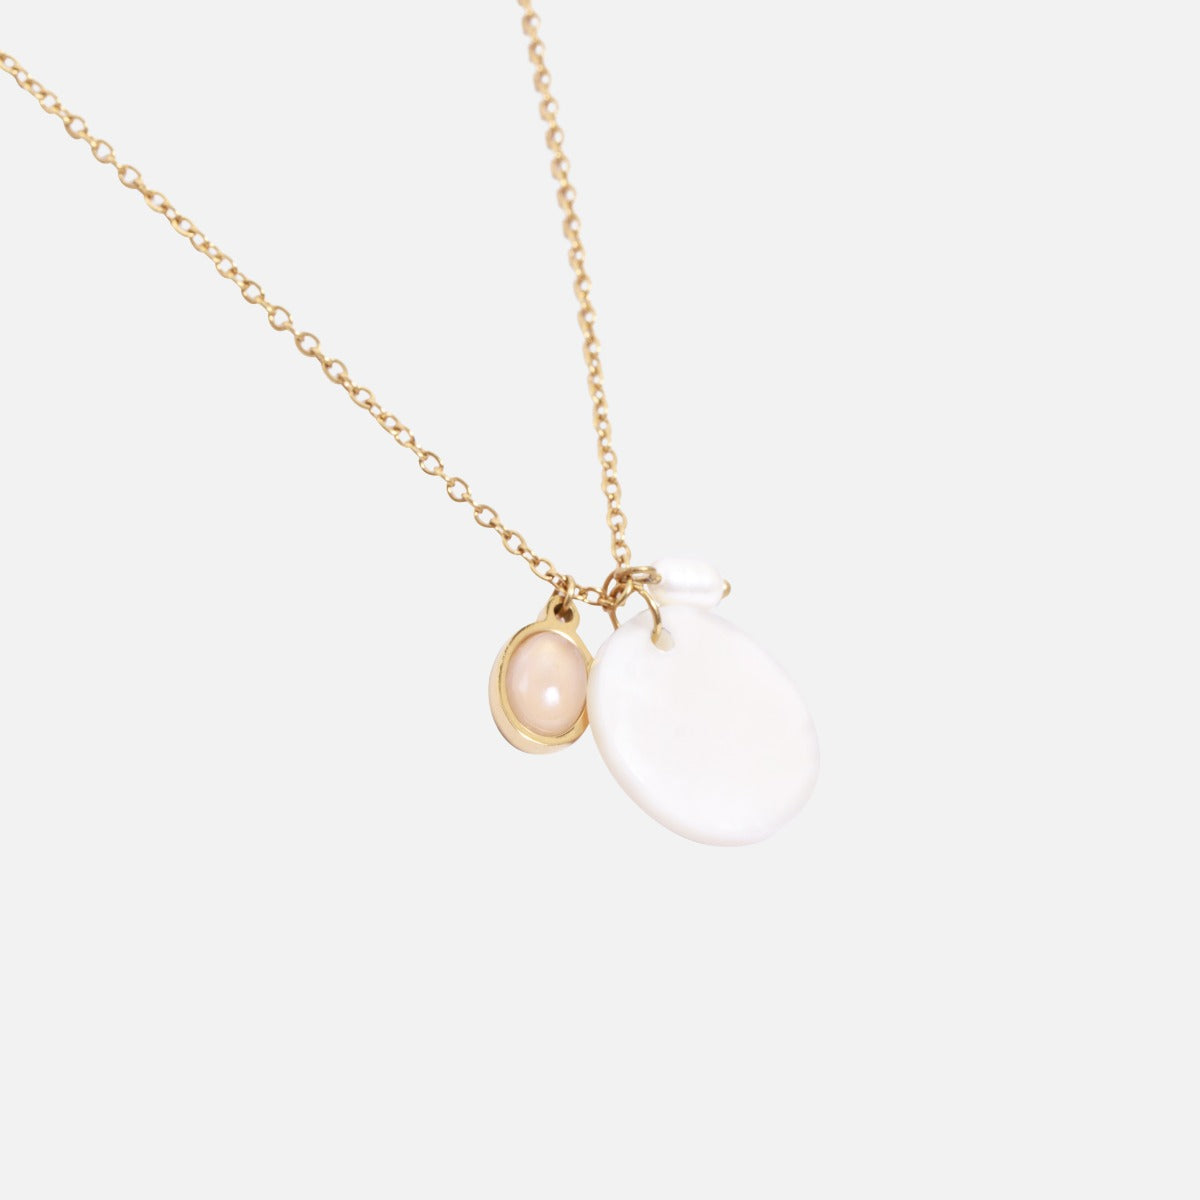 Stainless steel golden pendant with round and oval stone and pearl charm